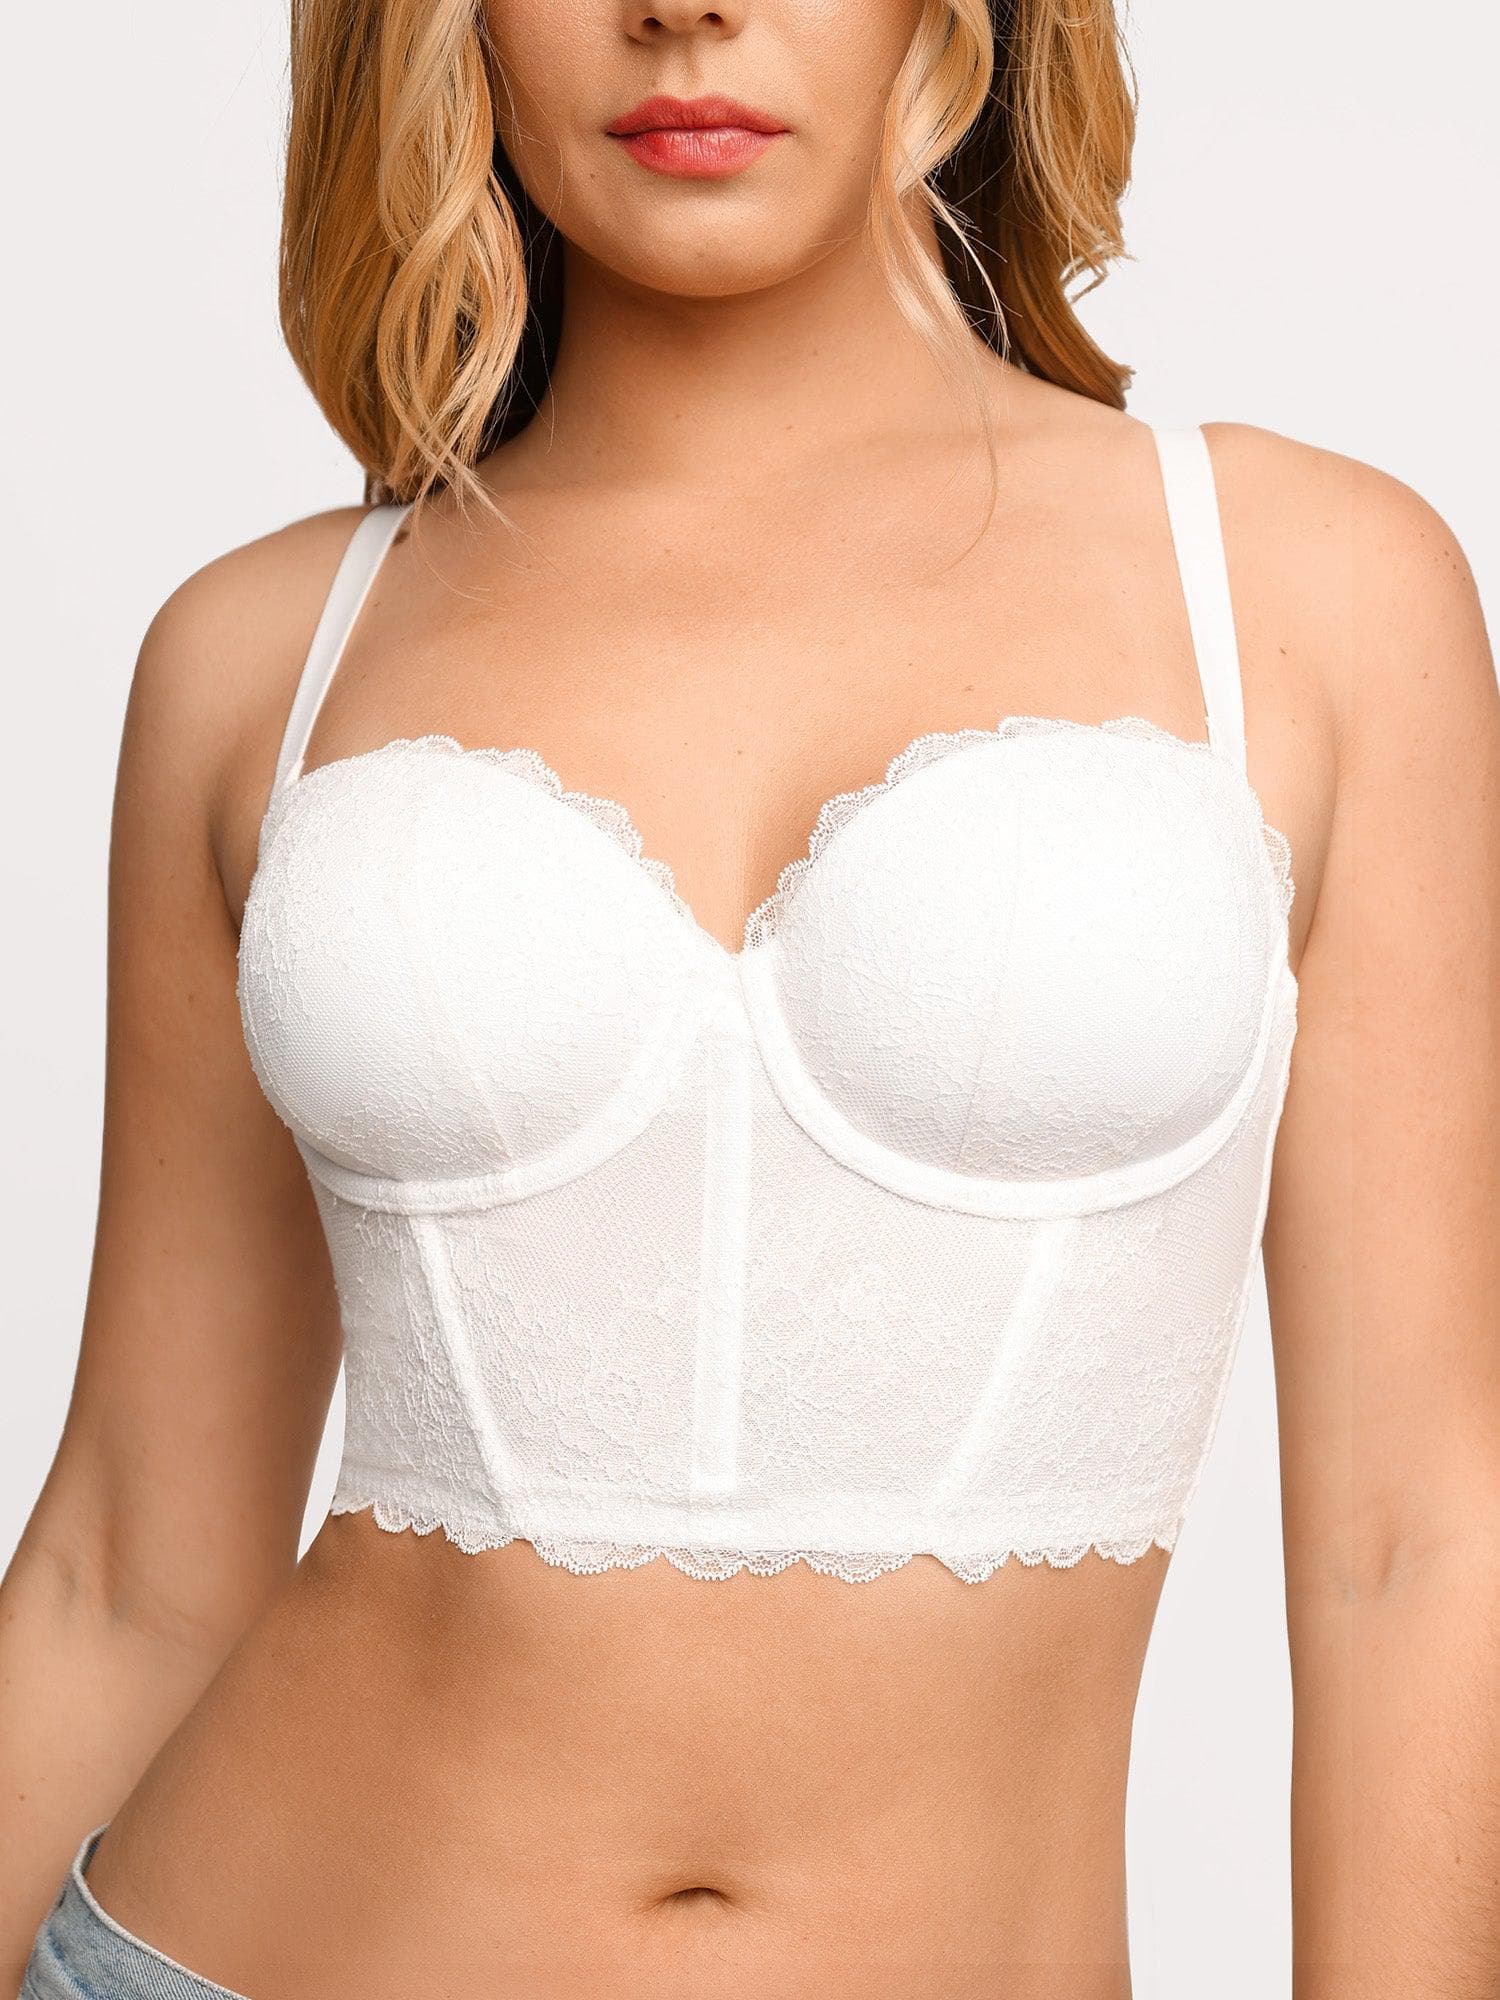 LONGLINE WHITE SOFT CUP SUPPORT BRA SLIMMING VINTAGE LOOK C D DD CROWNETTE  - Apparel & Accessories Store